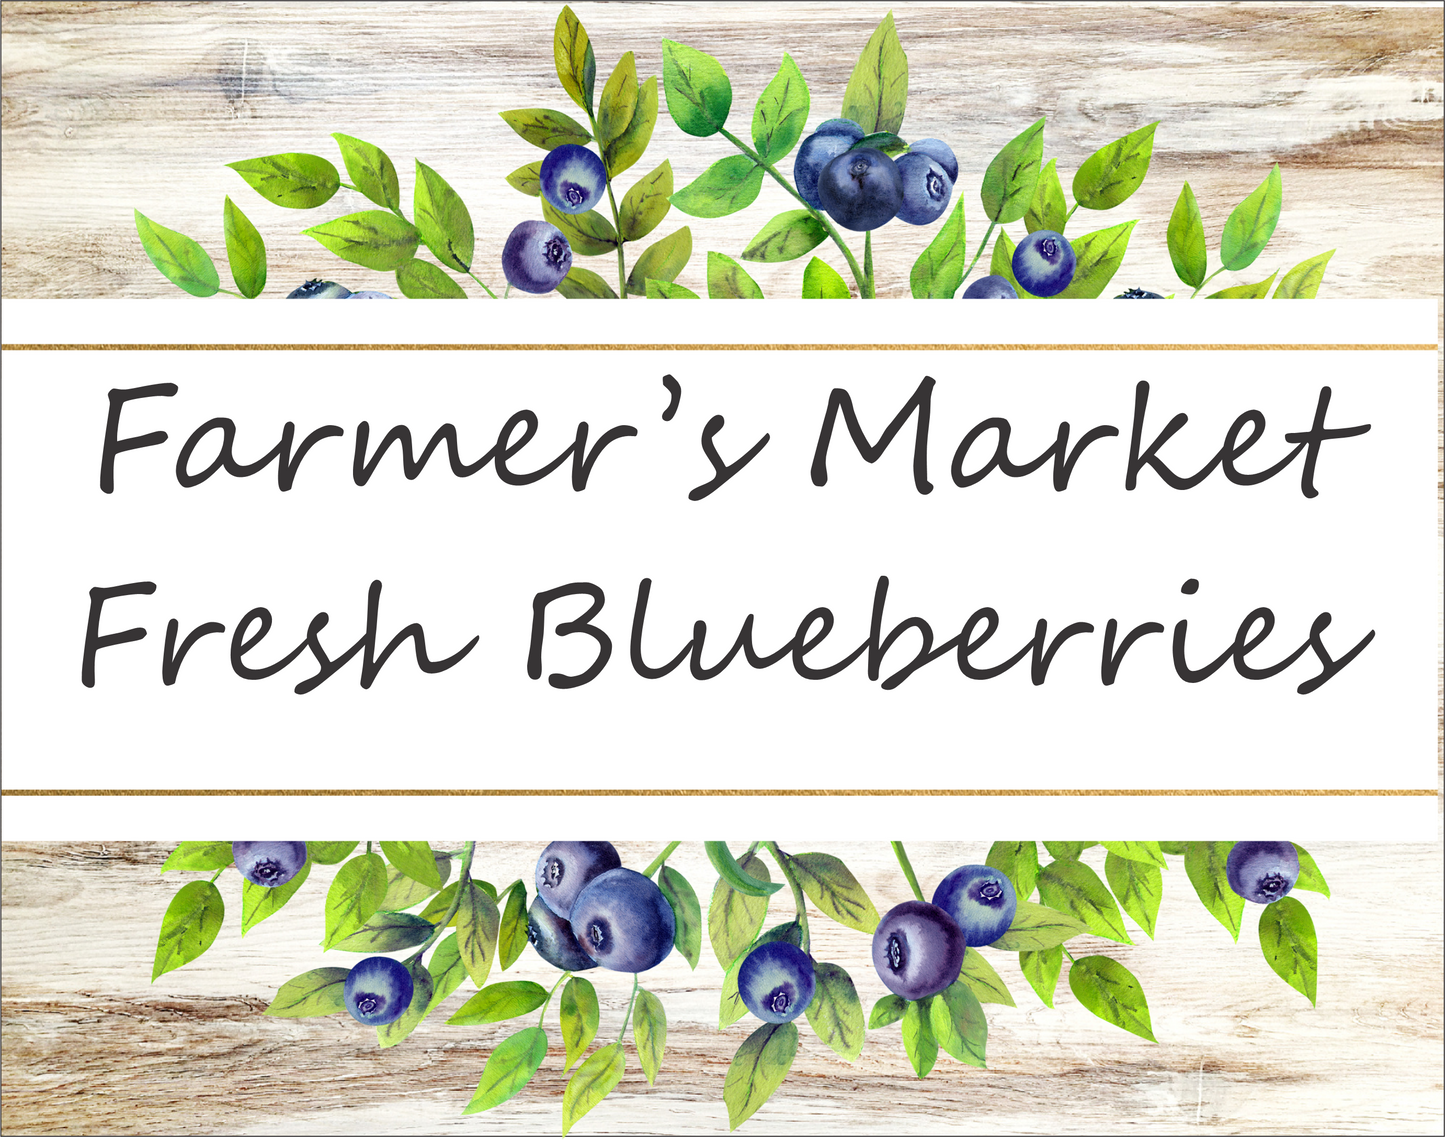 Farmers market blueberries 7x9 sign